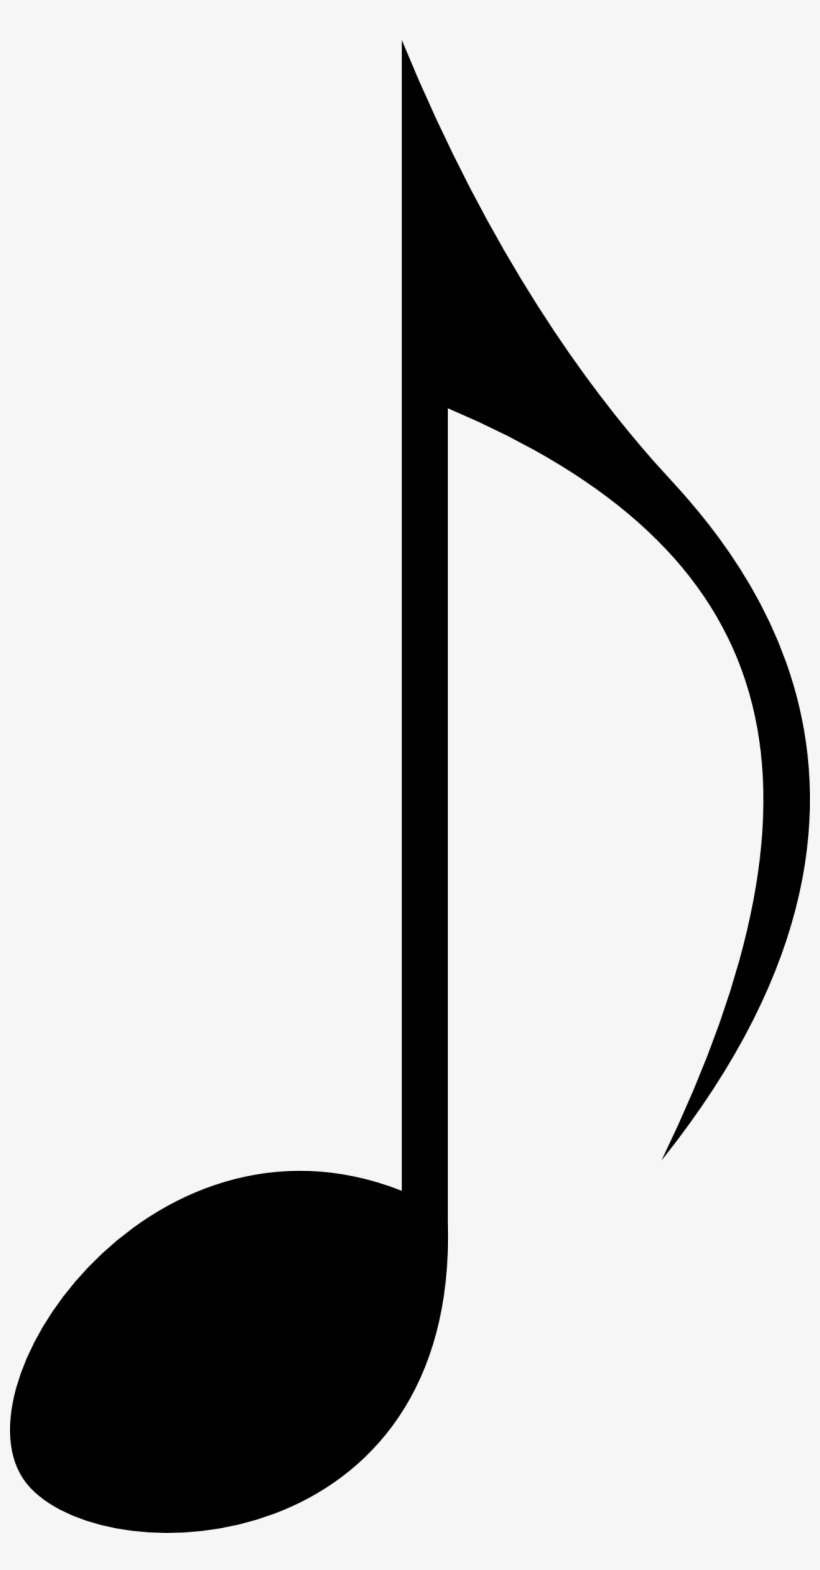 Eighth Attention - Music Notes Clipart, transparent png #245318